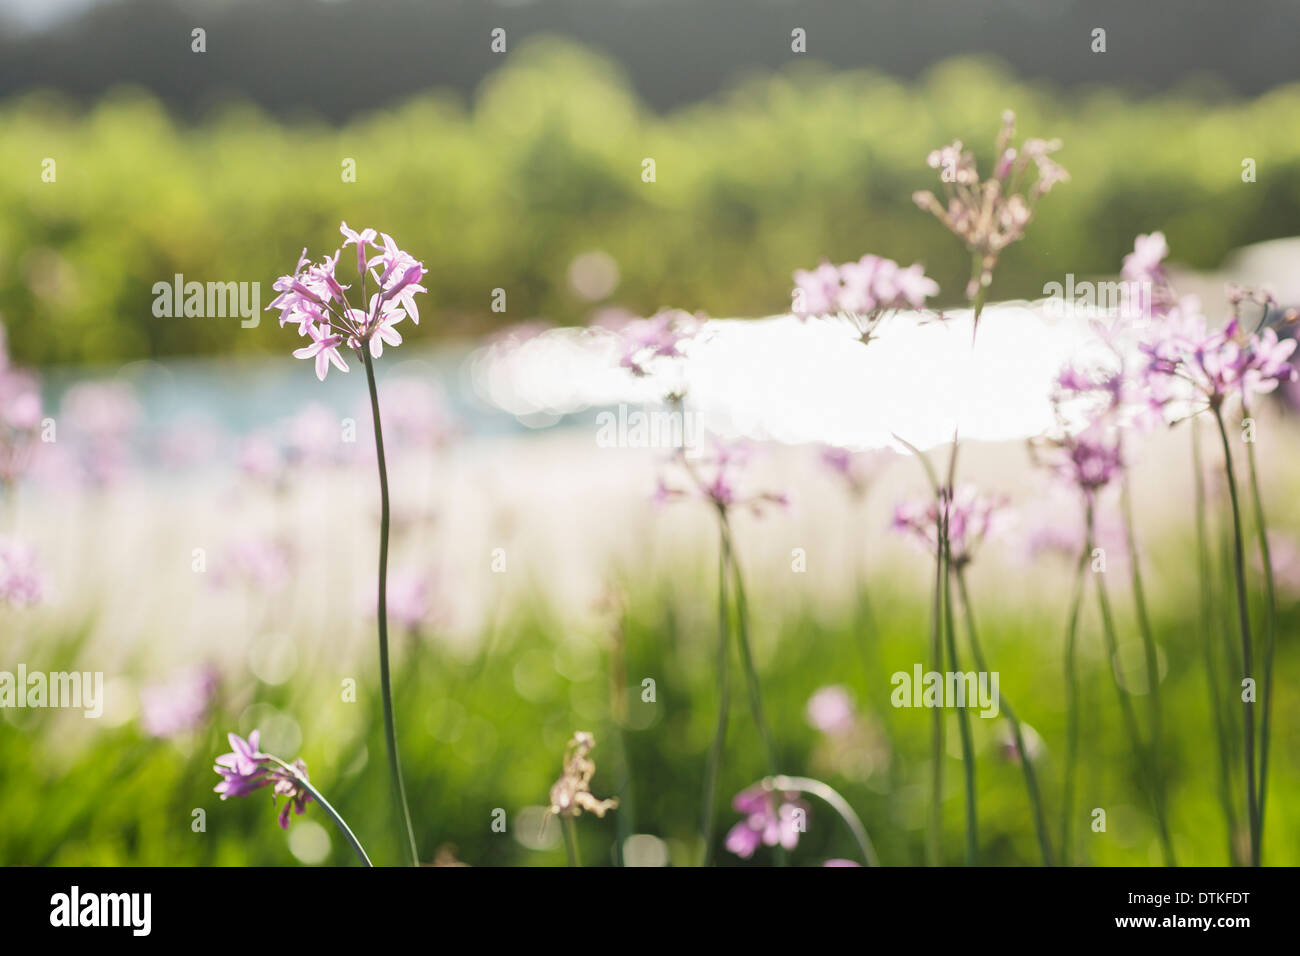 Close up of purple flowers growing in field Stock Photo